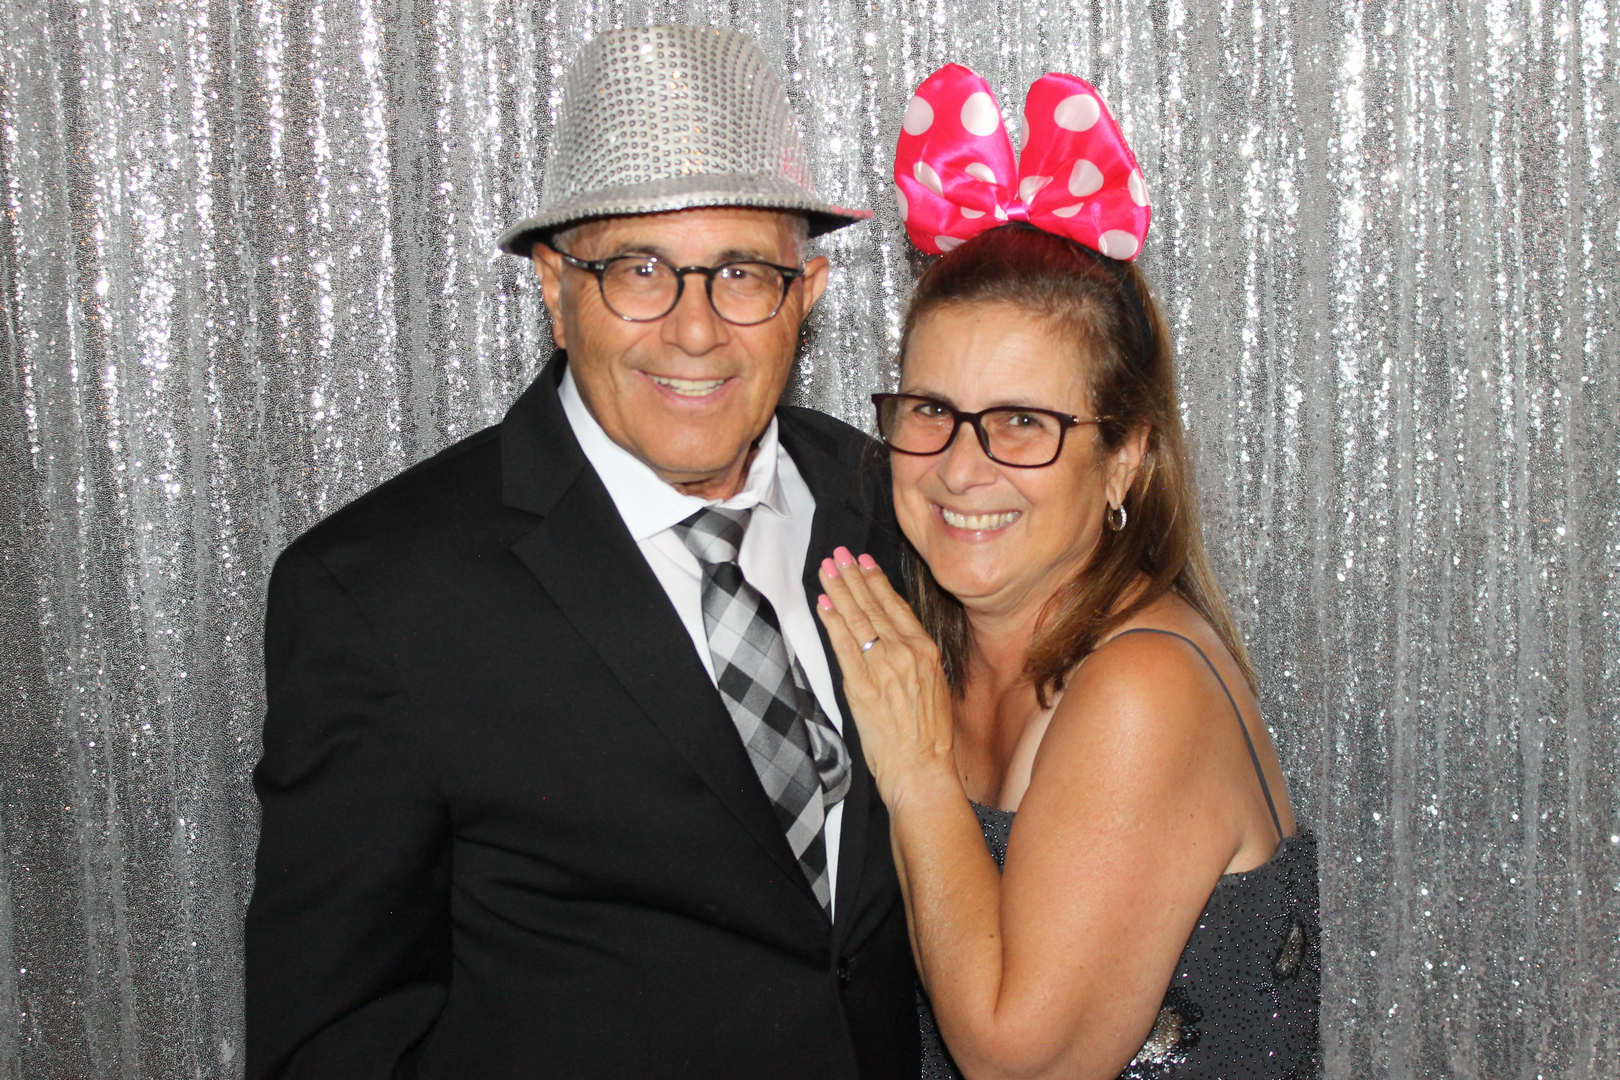 Read more about the article Making Custom Photo Booth Templates: Milton Weddings